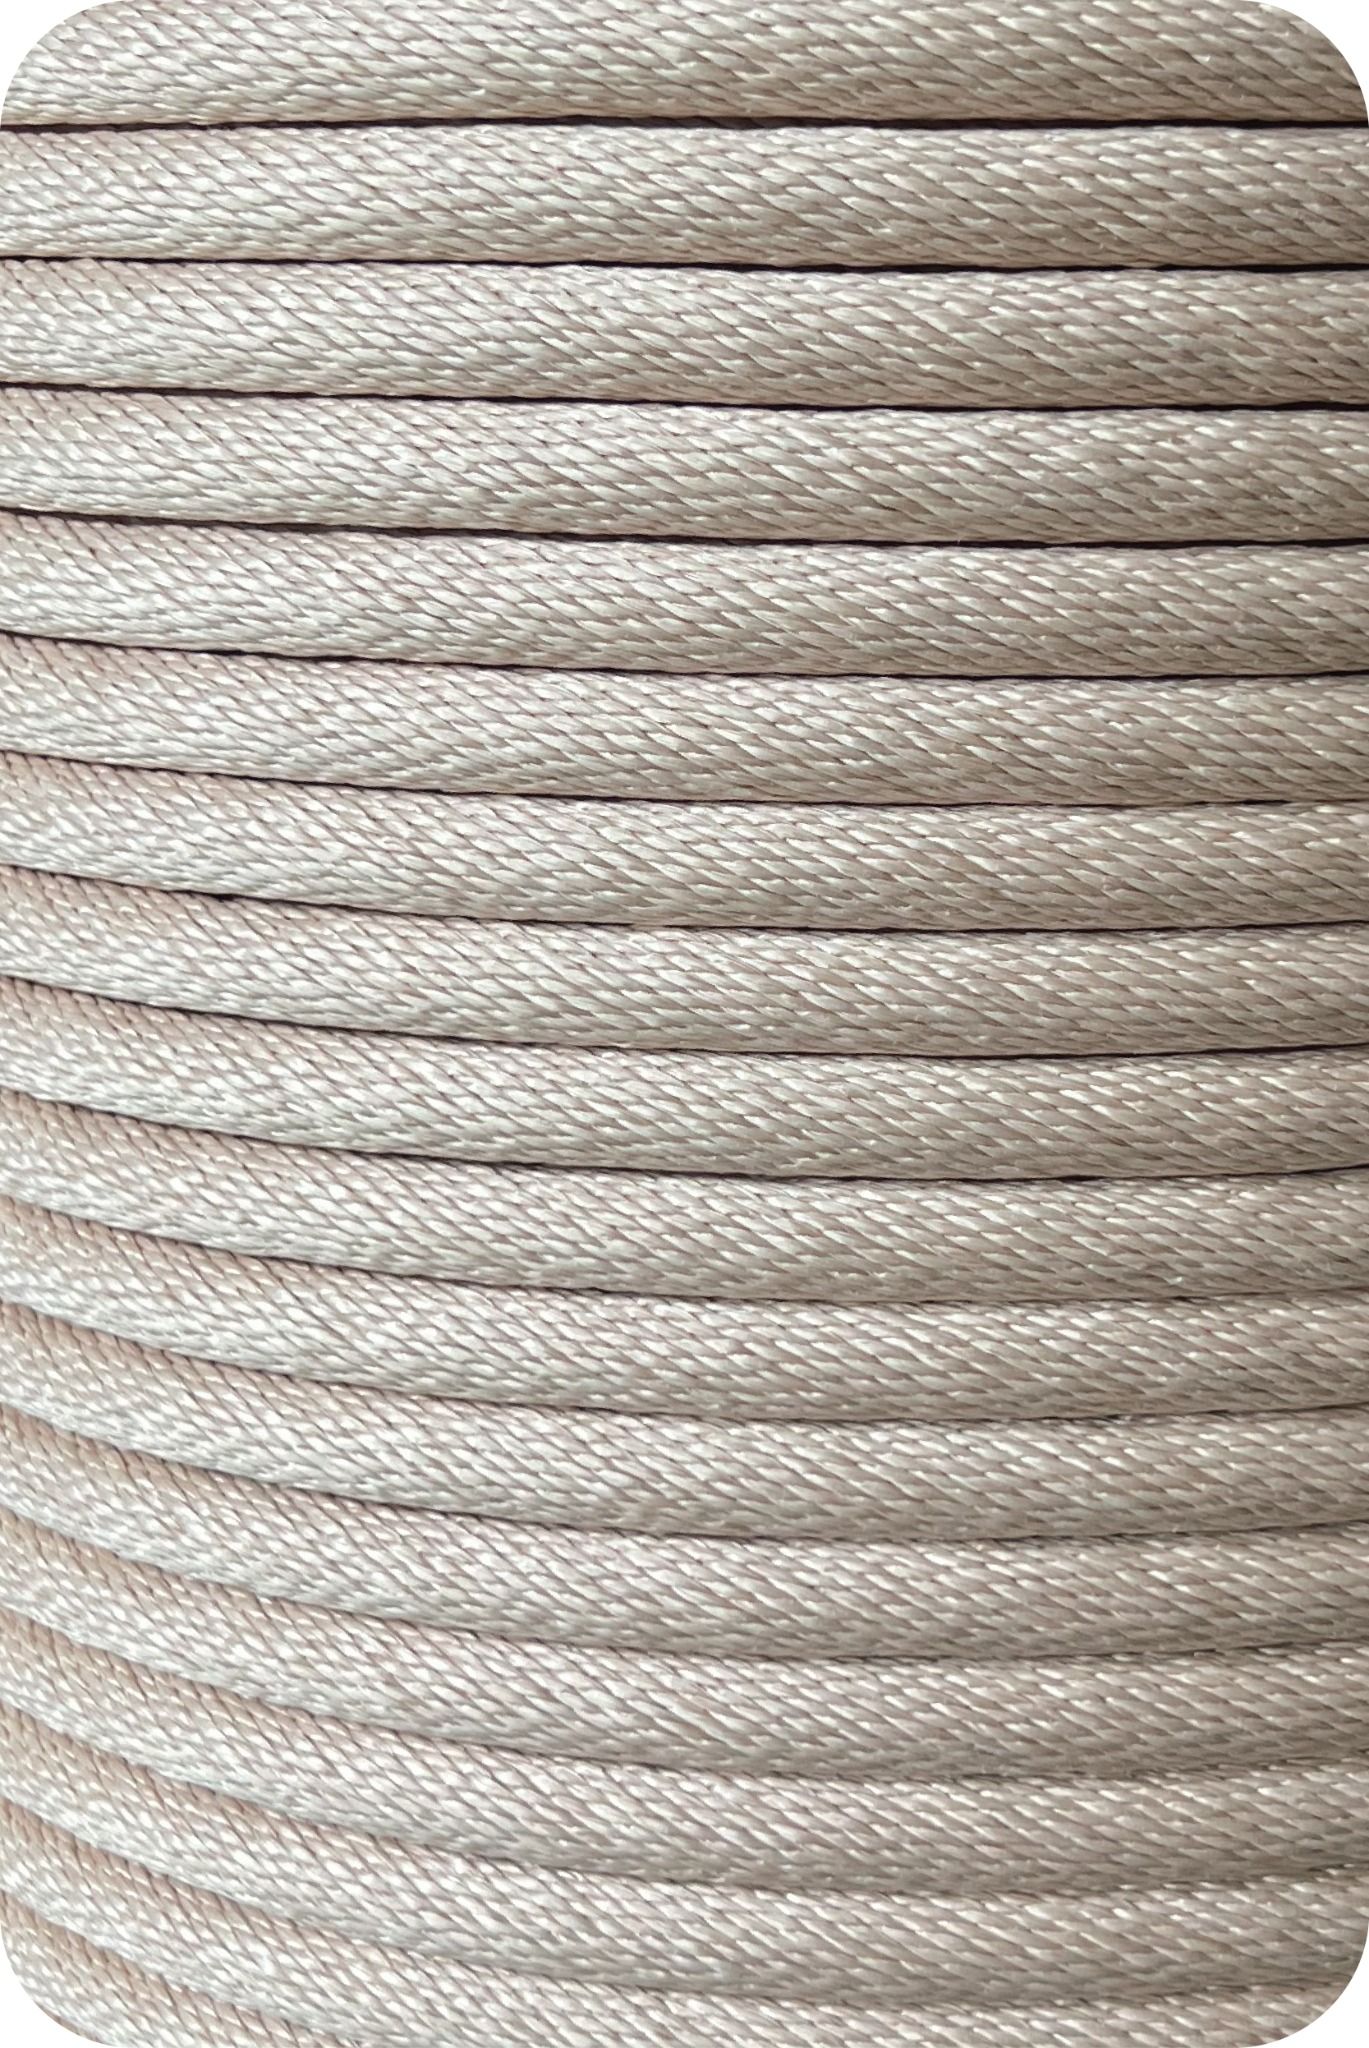 1 STRAND PP ROPE (FOR STEEL CABLE/ INOX CABLE)